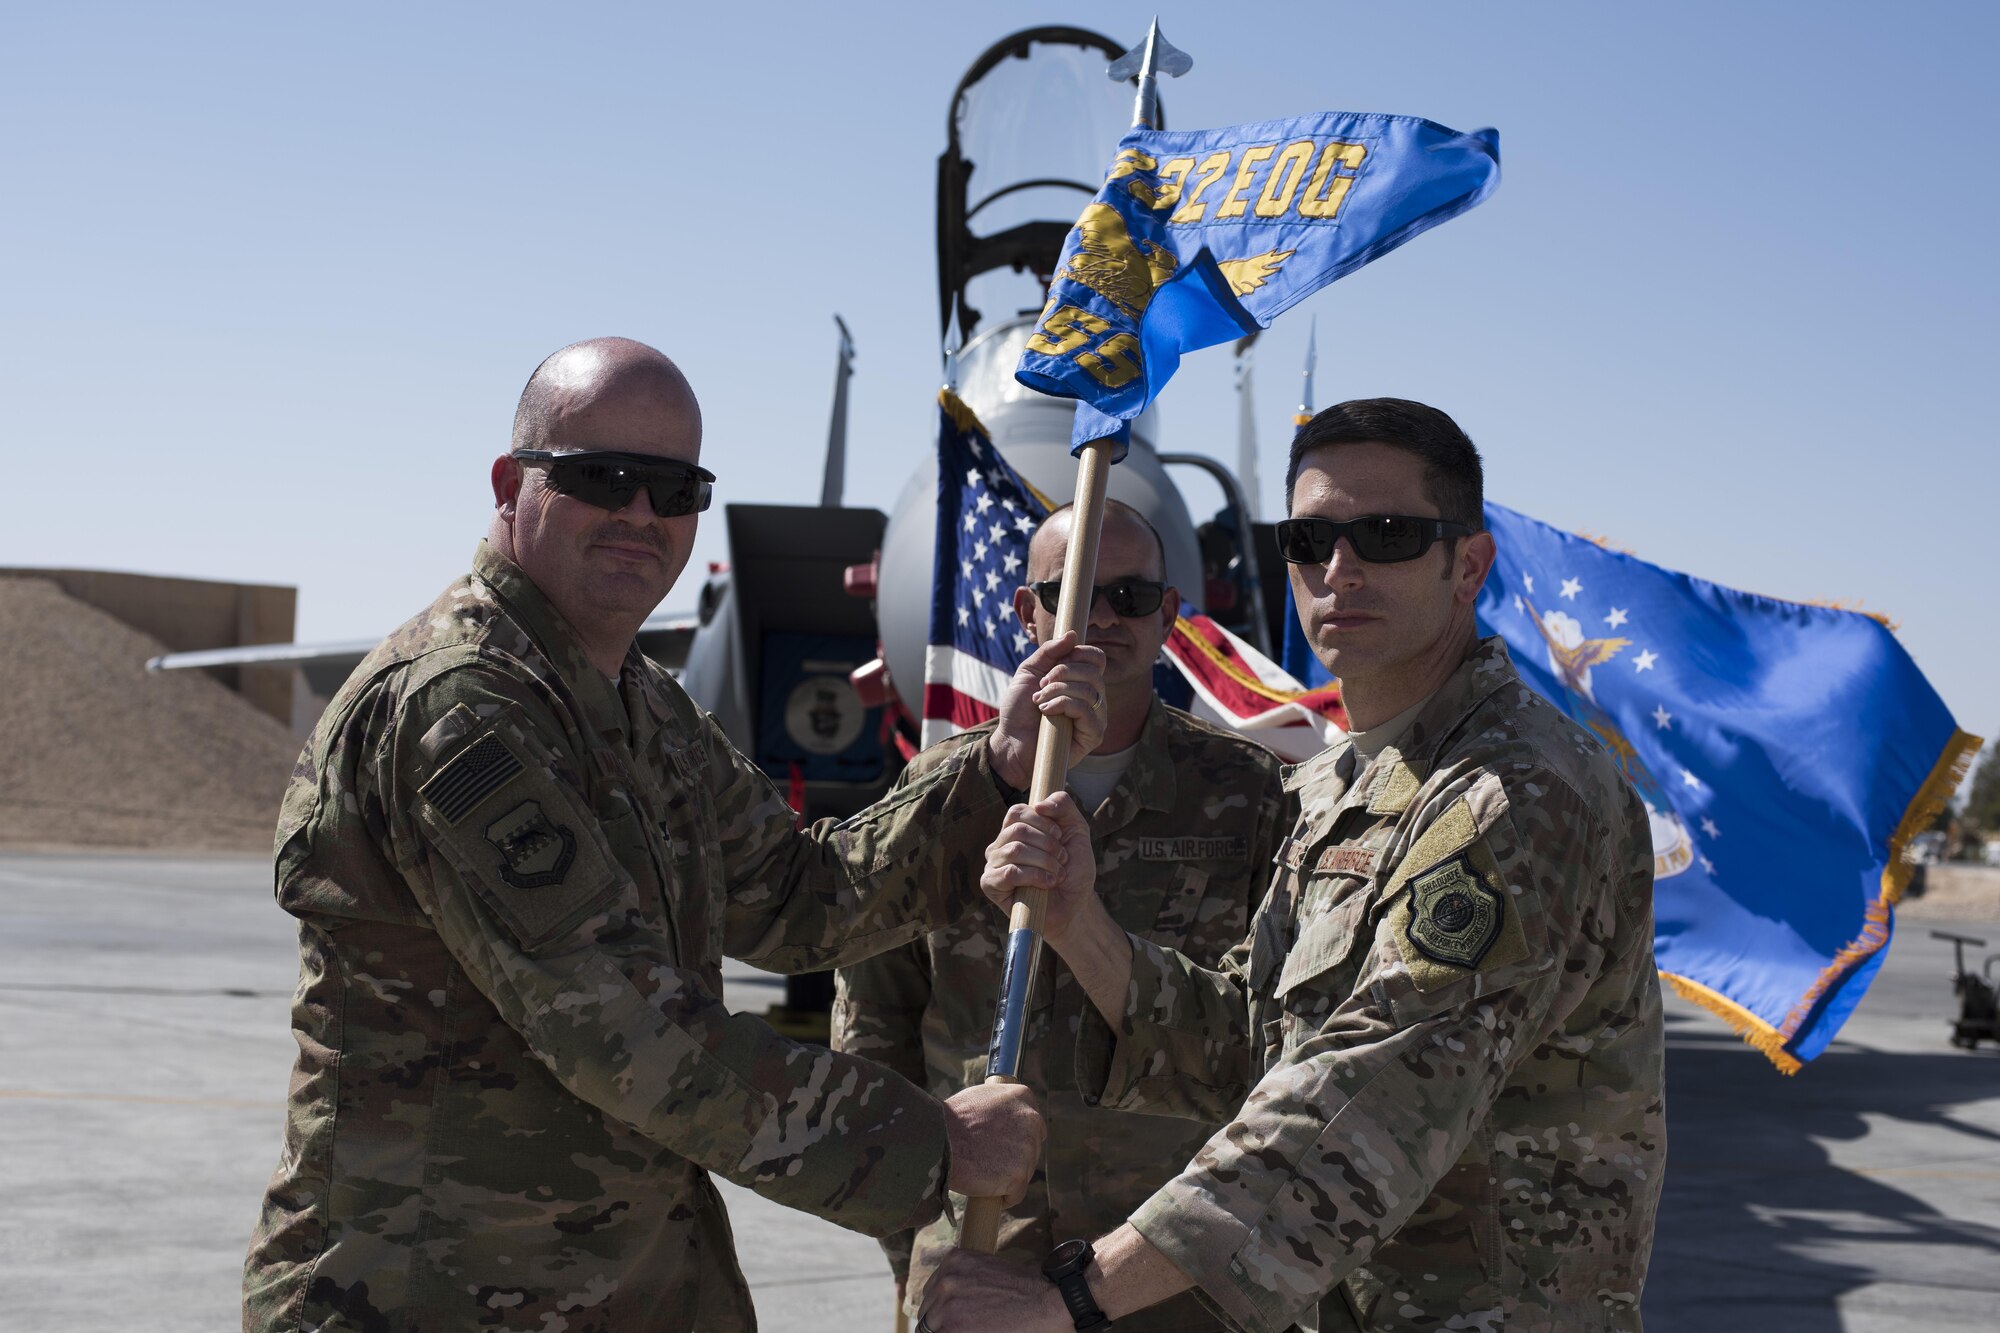 Col. William L. Marshall, 332nd Expeditionary Operations Group commander, left, passes the guidon to Lt. Col. Nathan G. Shelton, during the 332nd Expeditionary Operations Support Squadron assumption of command ceremony June 8, 2017, in Southwest Asia. The passing of a guidon symbolizes a unit’s transfer of command. (U.S. Air Force photo/Senior Airman Damon Kasberg)